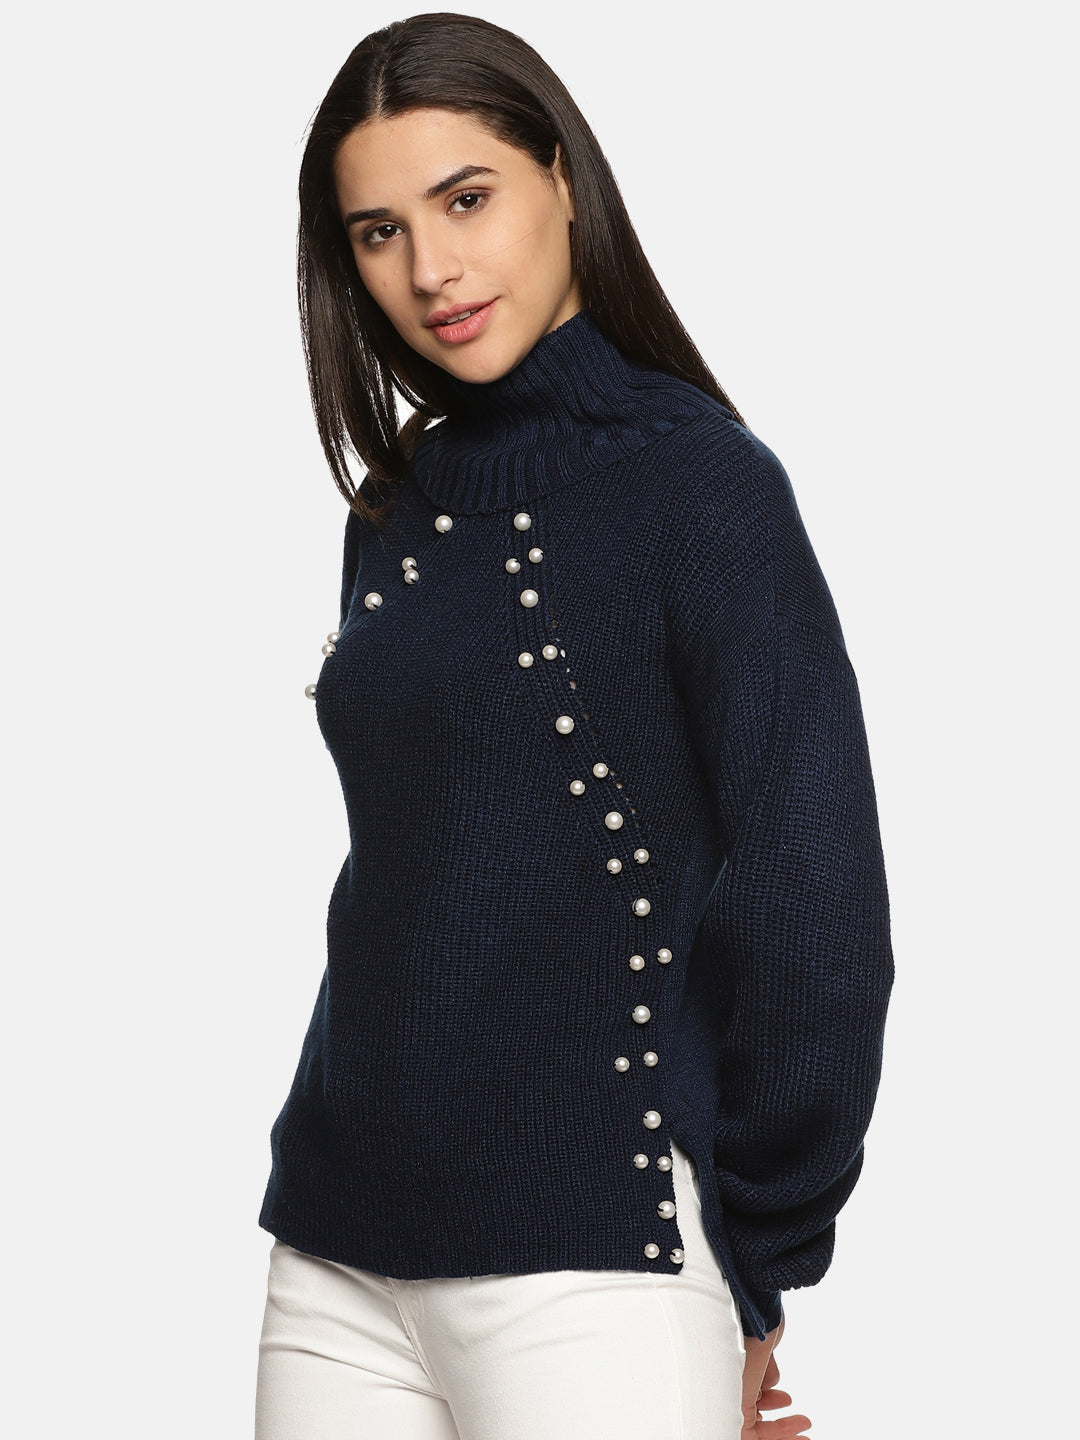 IS.U Navy Pearl High Neck Oversized Knitted Sweater